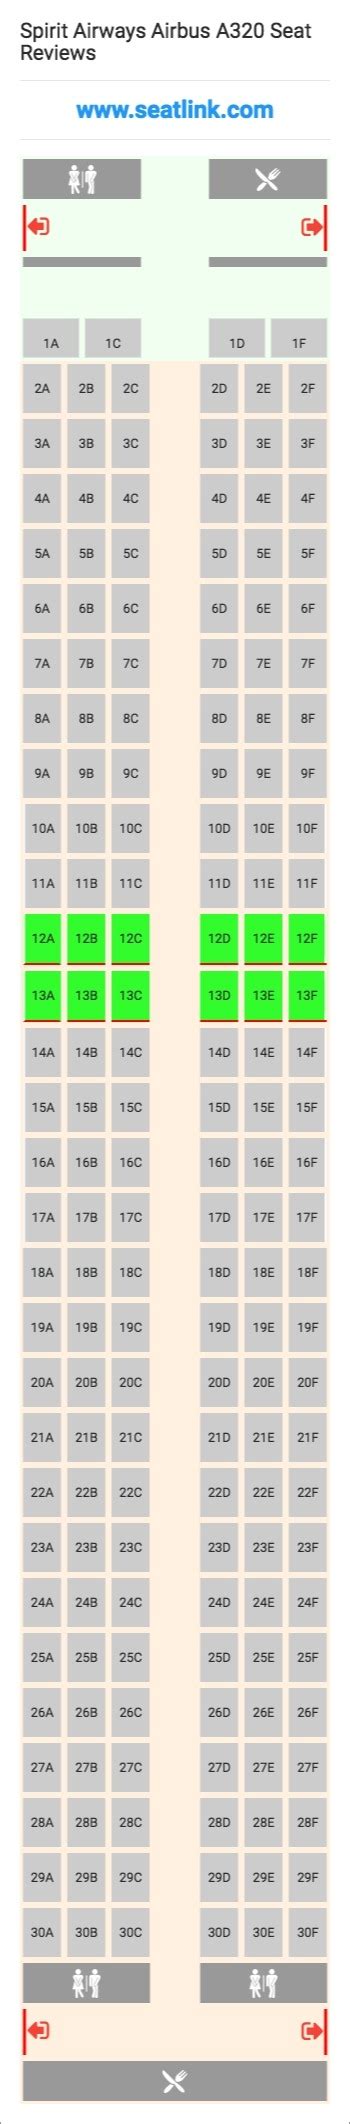 8 Images Spirit Airlines Airbus A320 Seat Map And View Alqu Blog